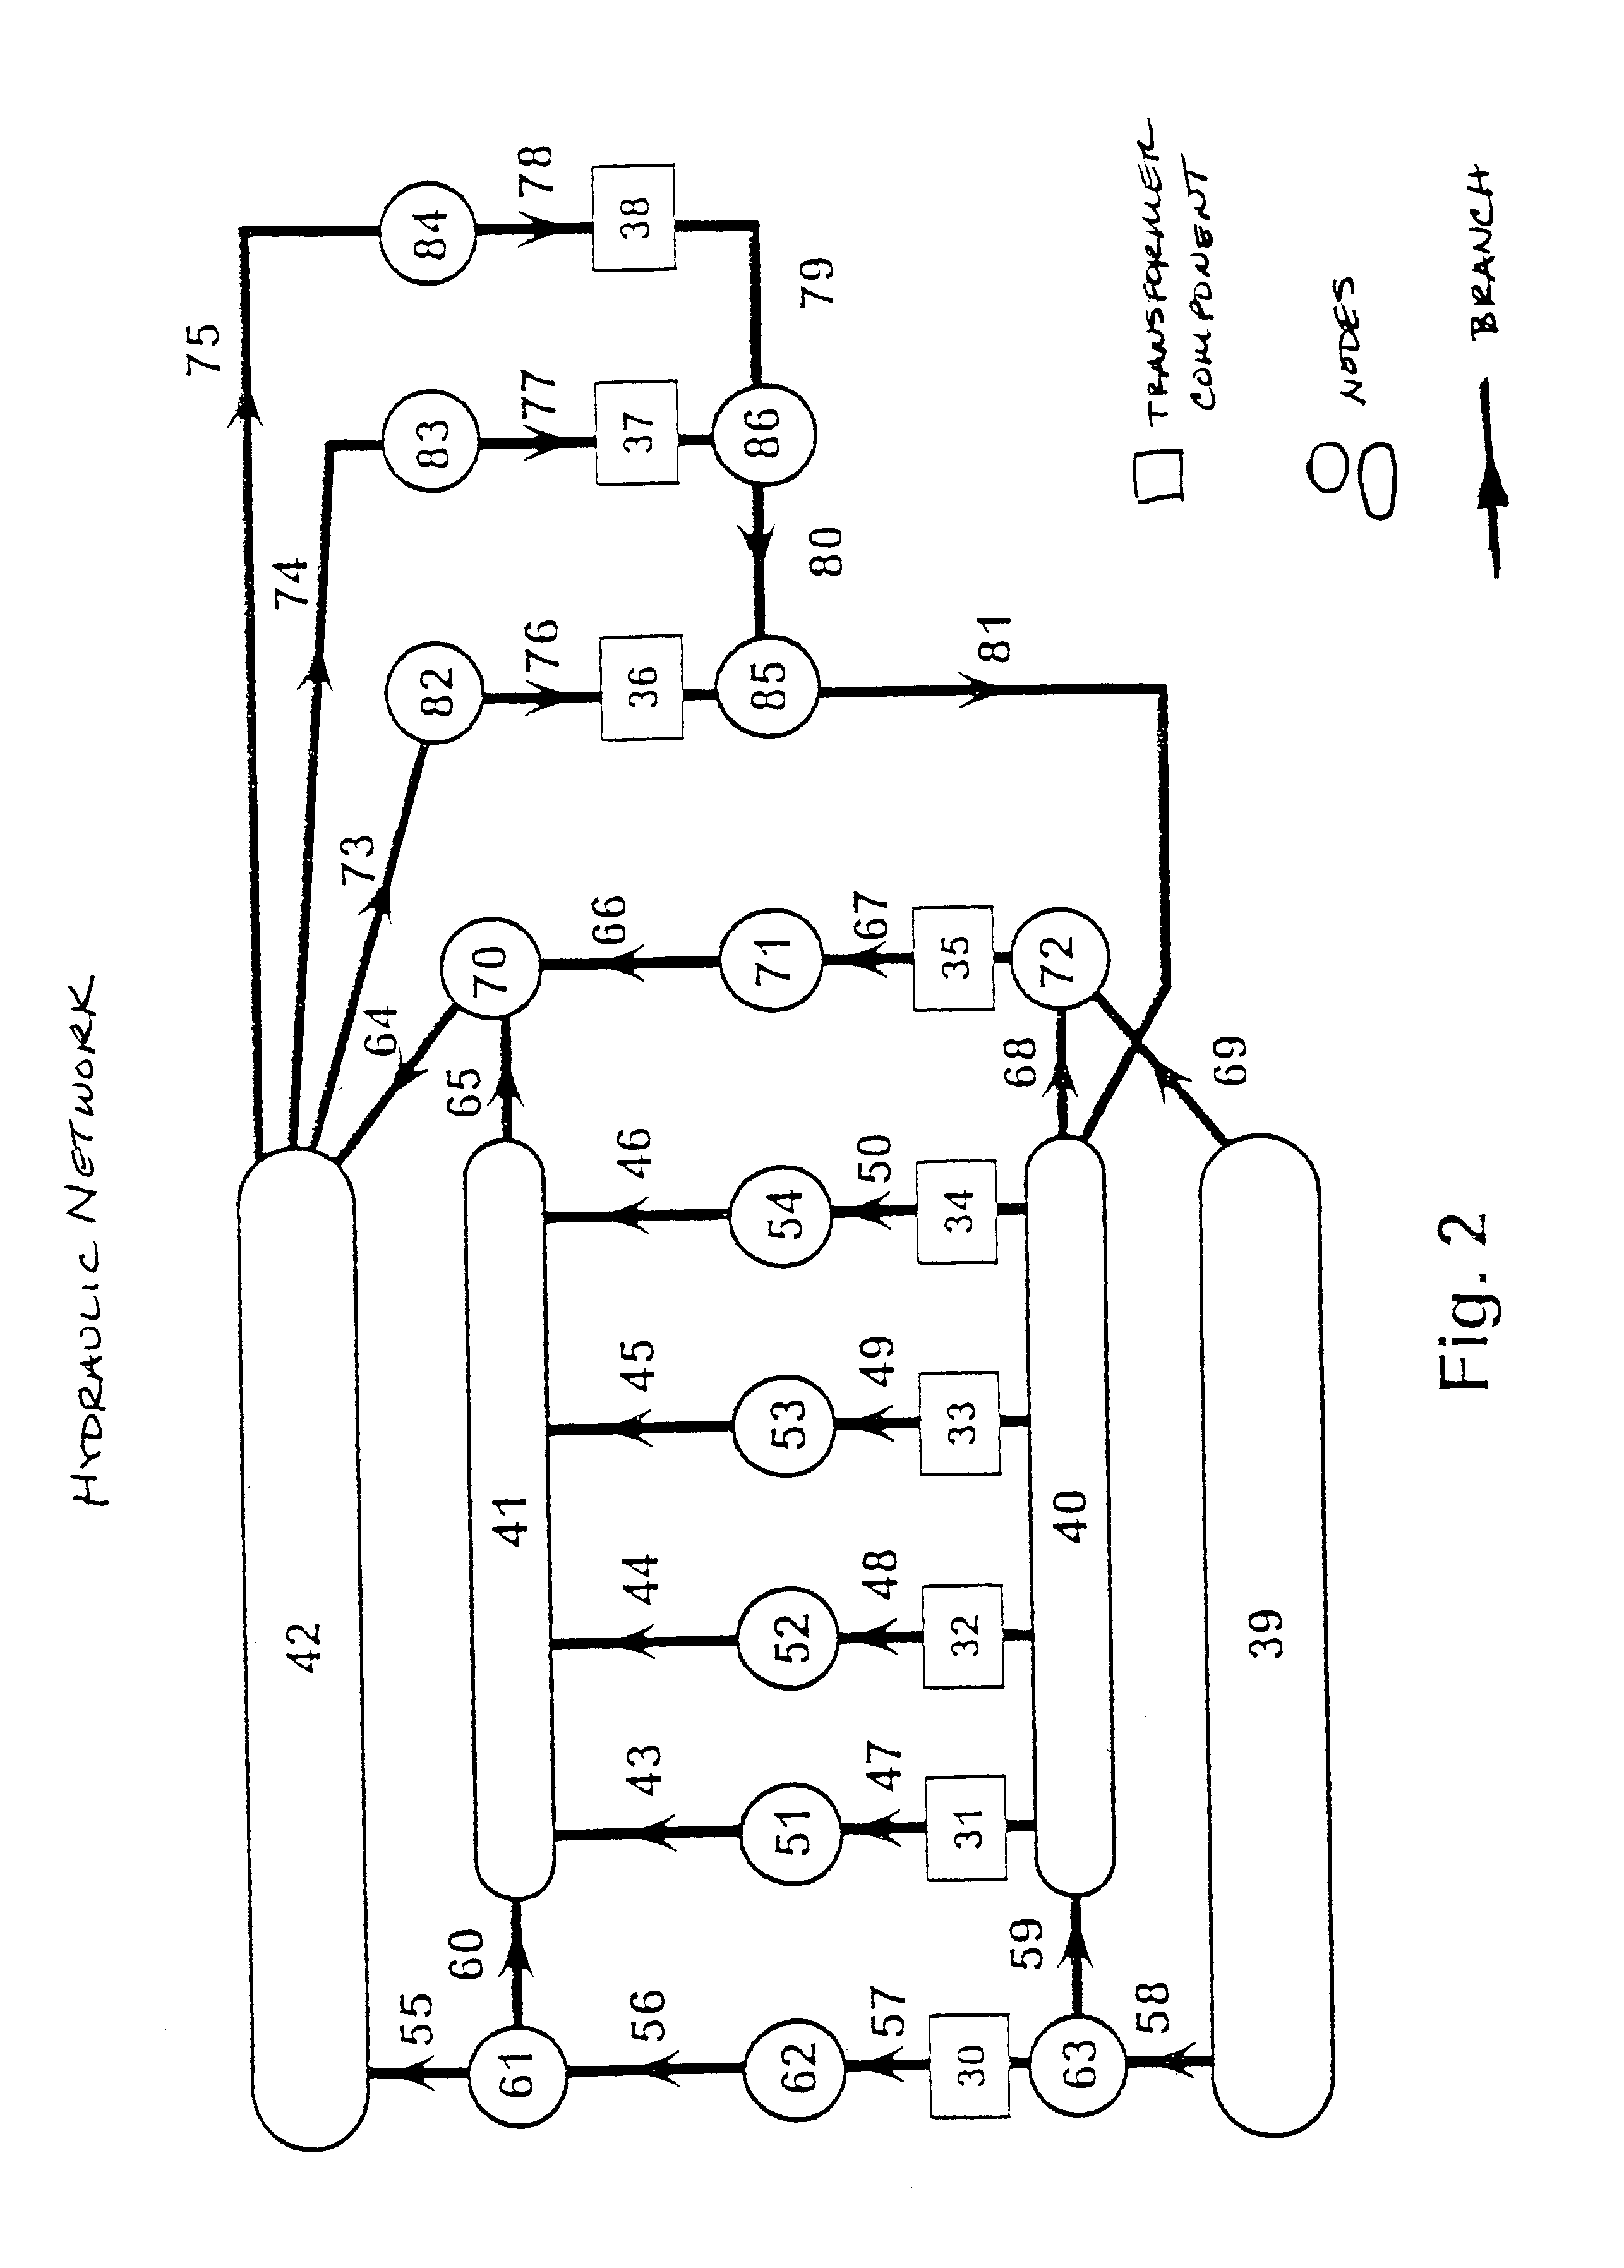 Method and arrangement for ascertaining state variables